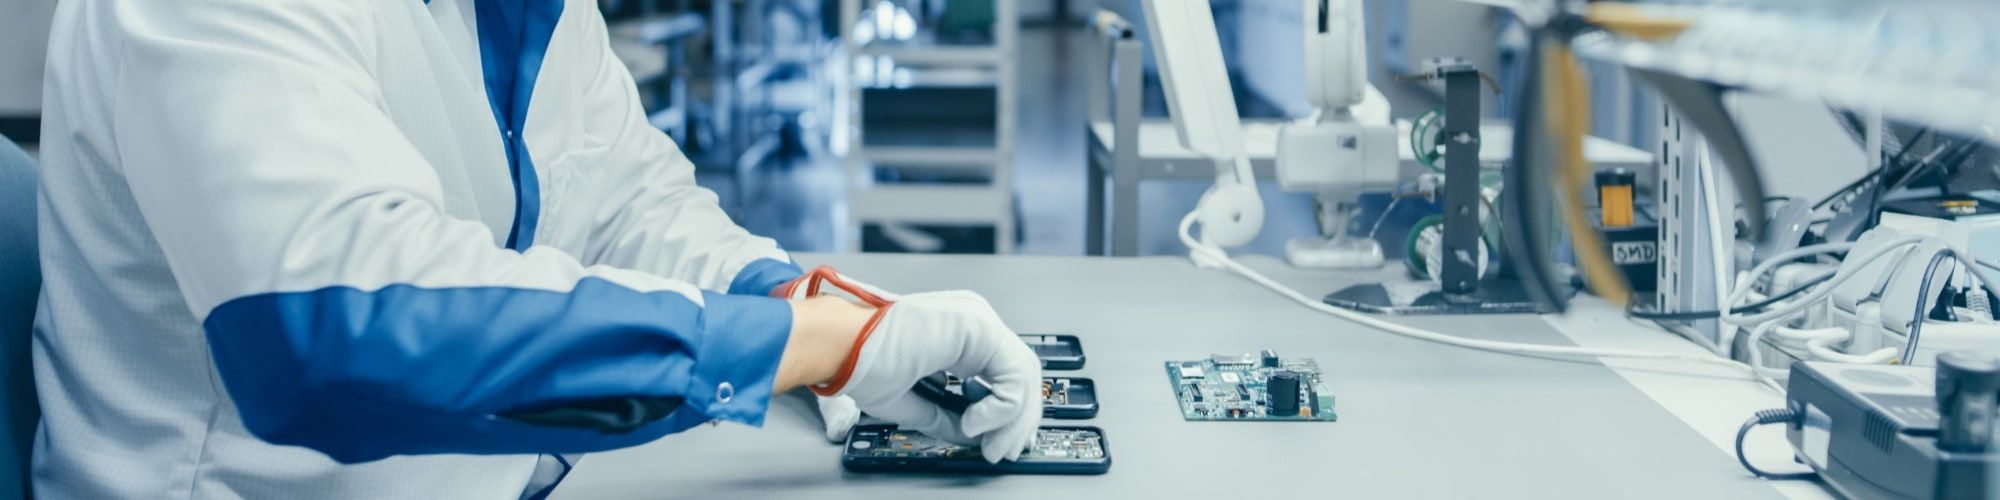 engineering technical specialist using plier to assemble Printed Circuit Board for Smartphone. Electronics Factory Workers in a High Tech Factory Facility